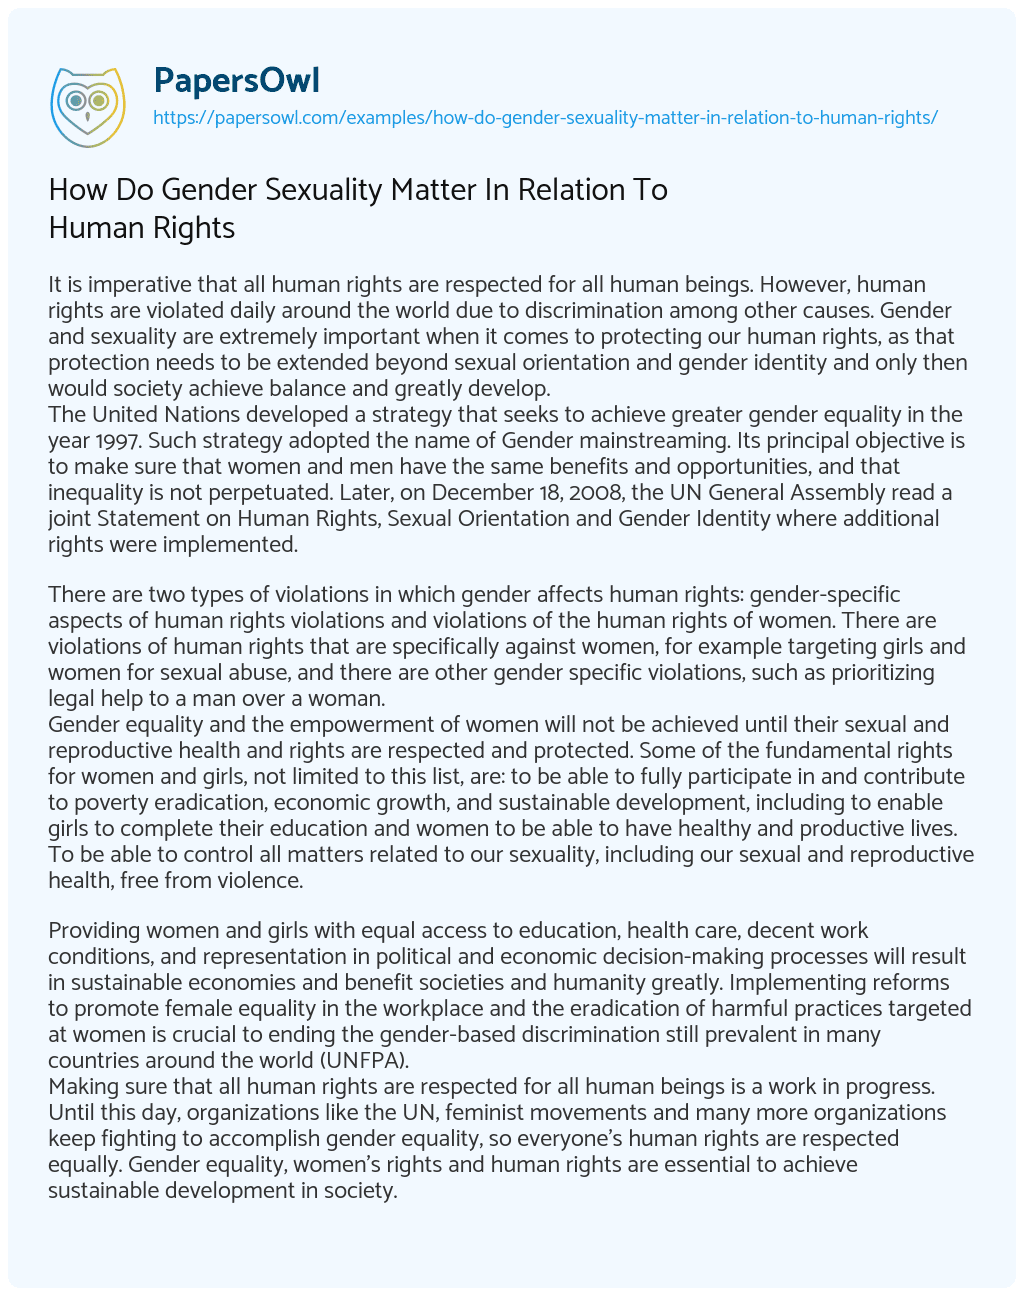 Essay on How do Gender Sexuality Matter in Relation to Human Rights